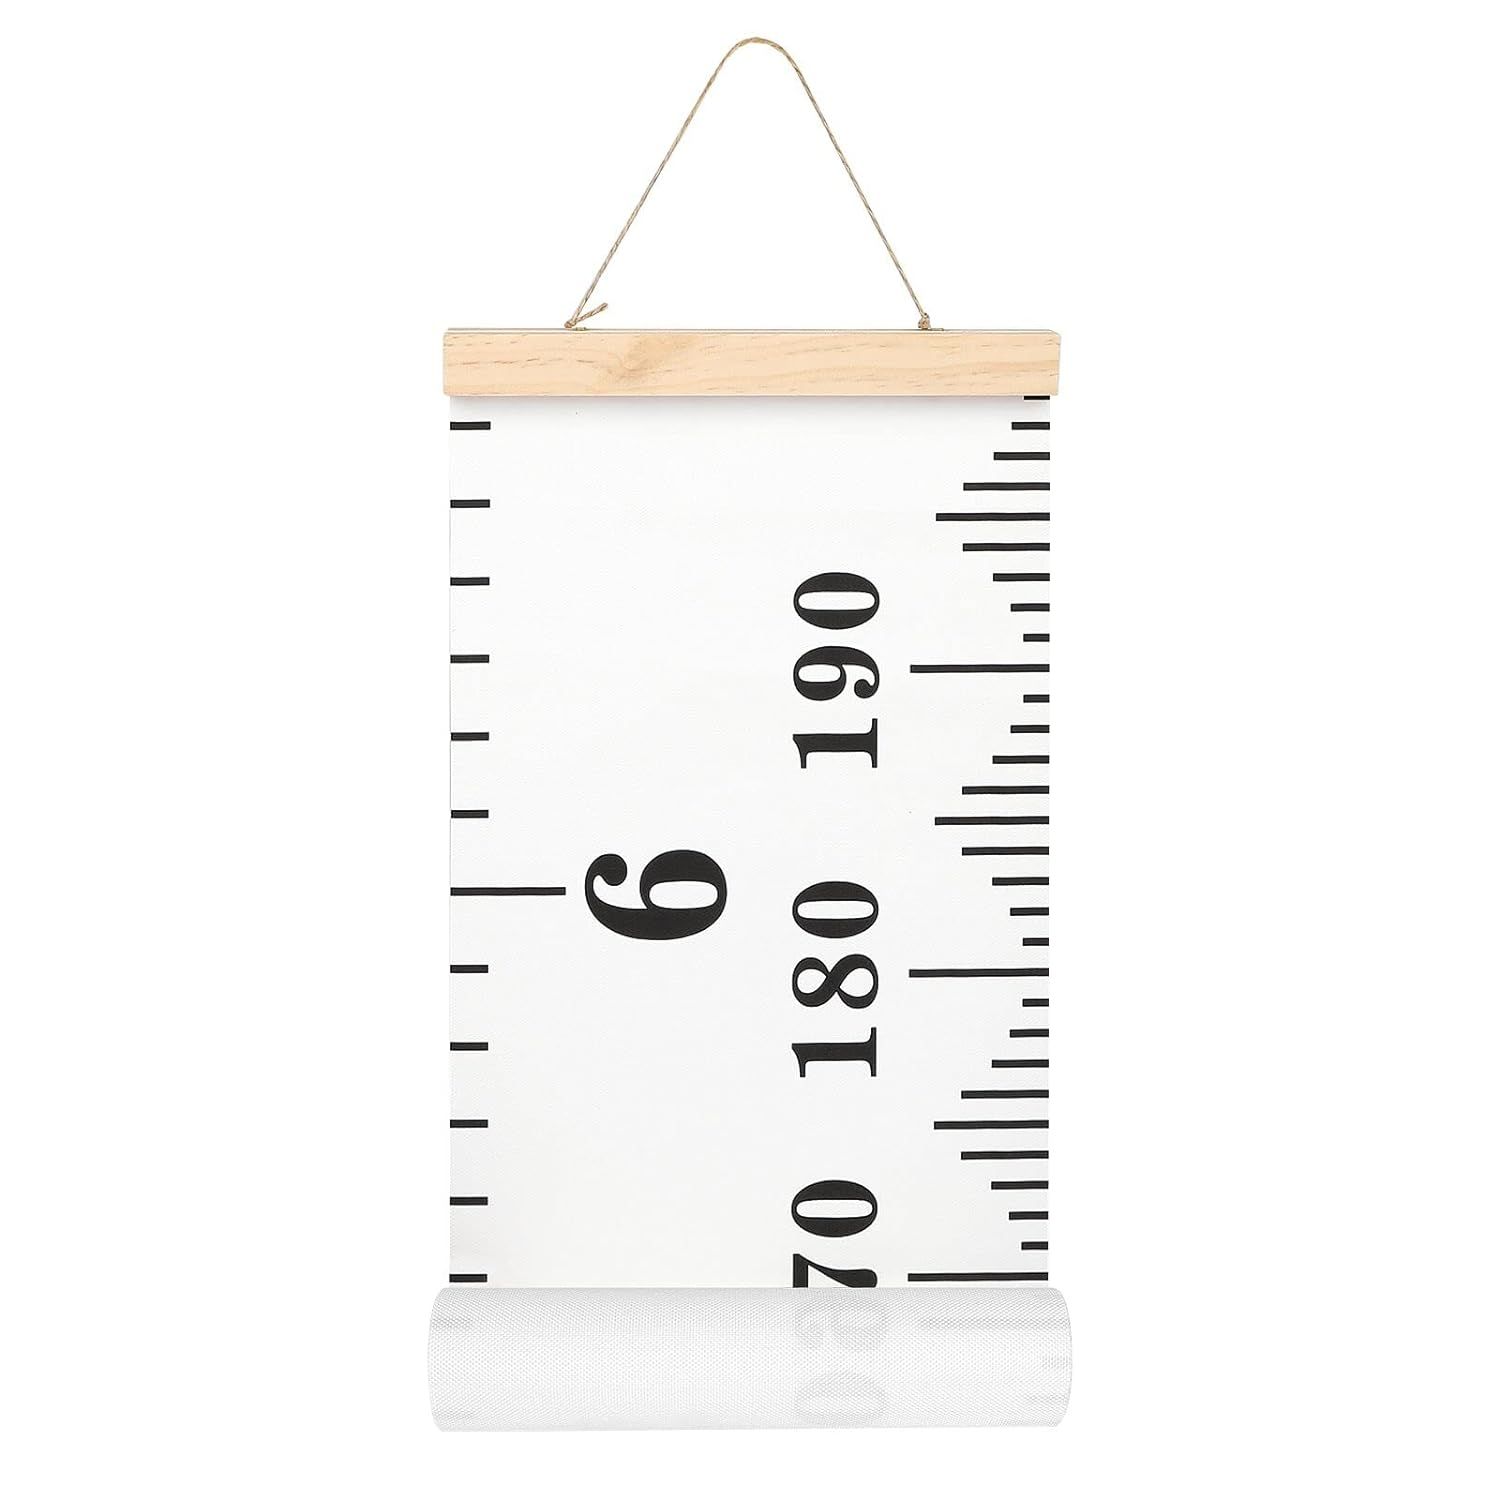 10 Best Baby Growth Charts for Tracking Height Milestones